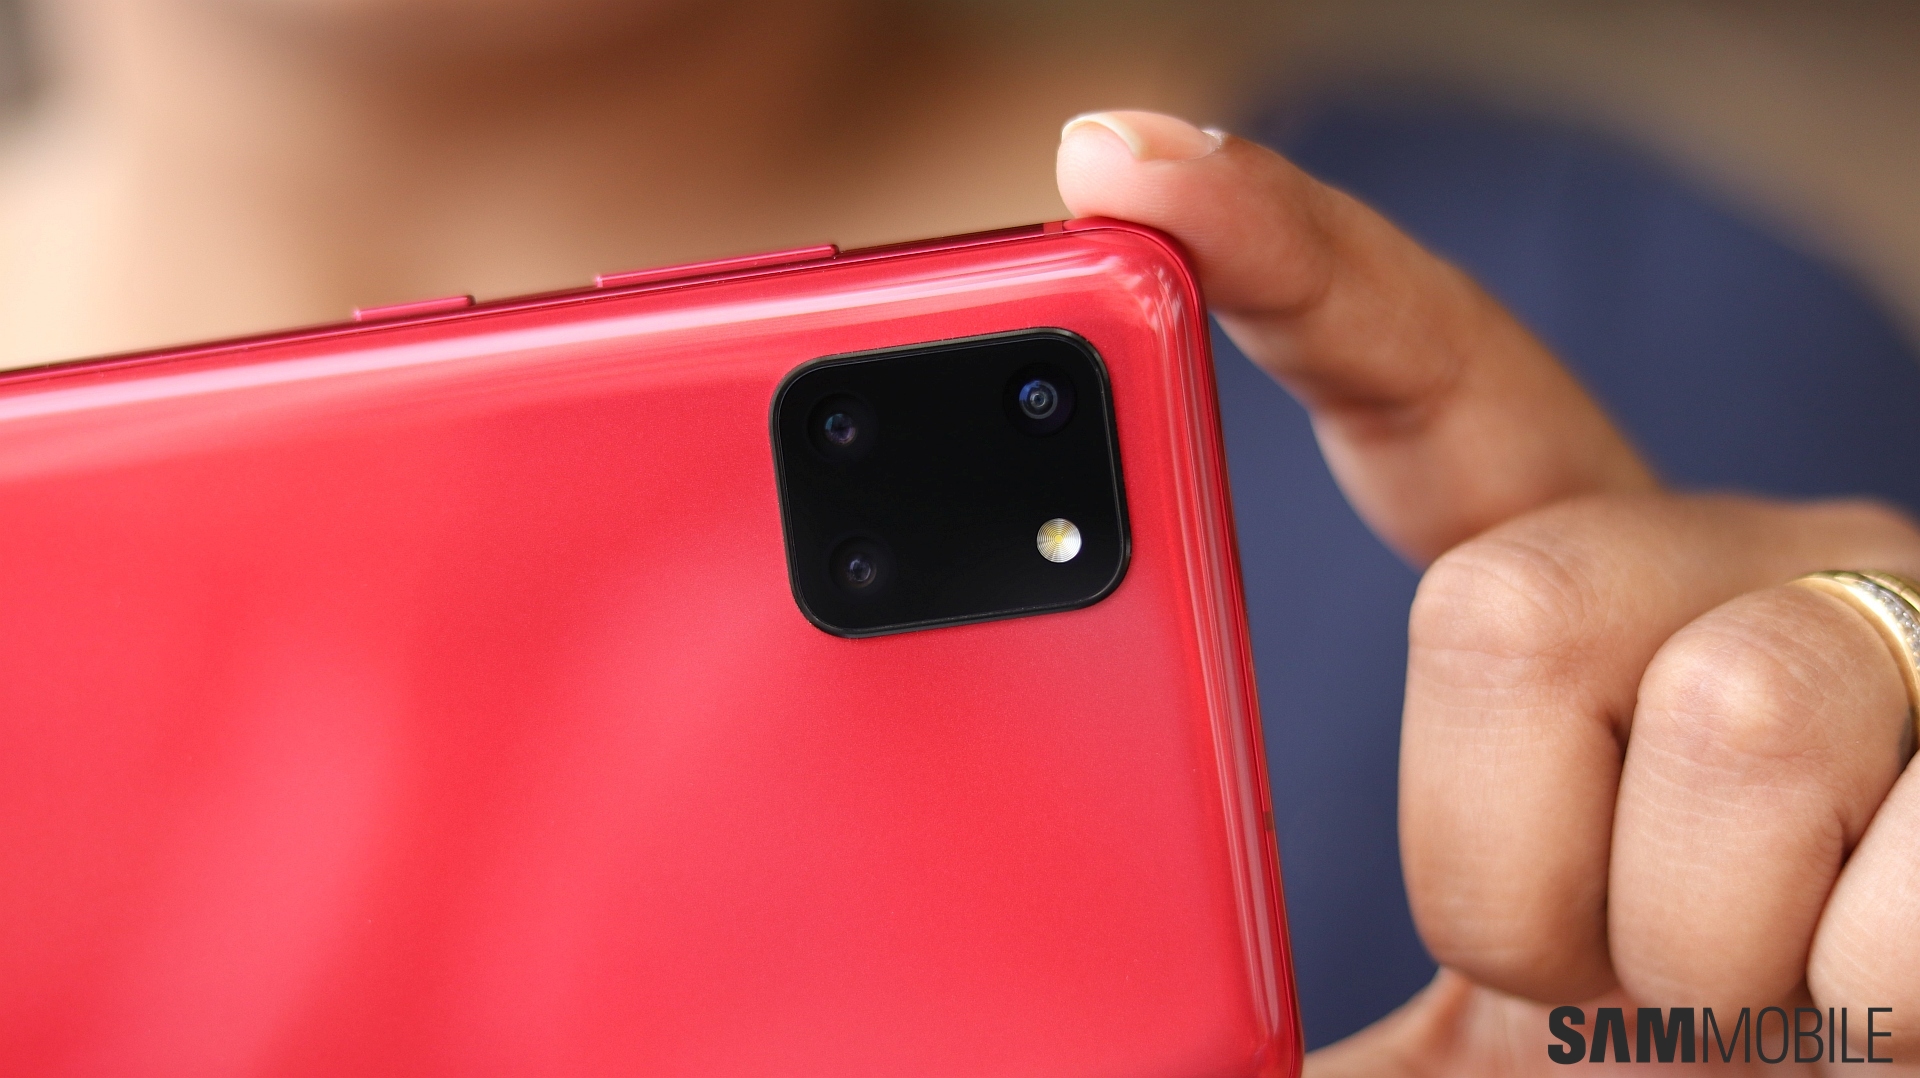 What cameras does the Note10 lite have?